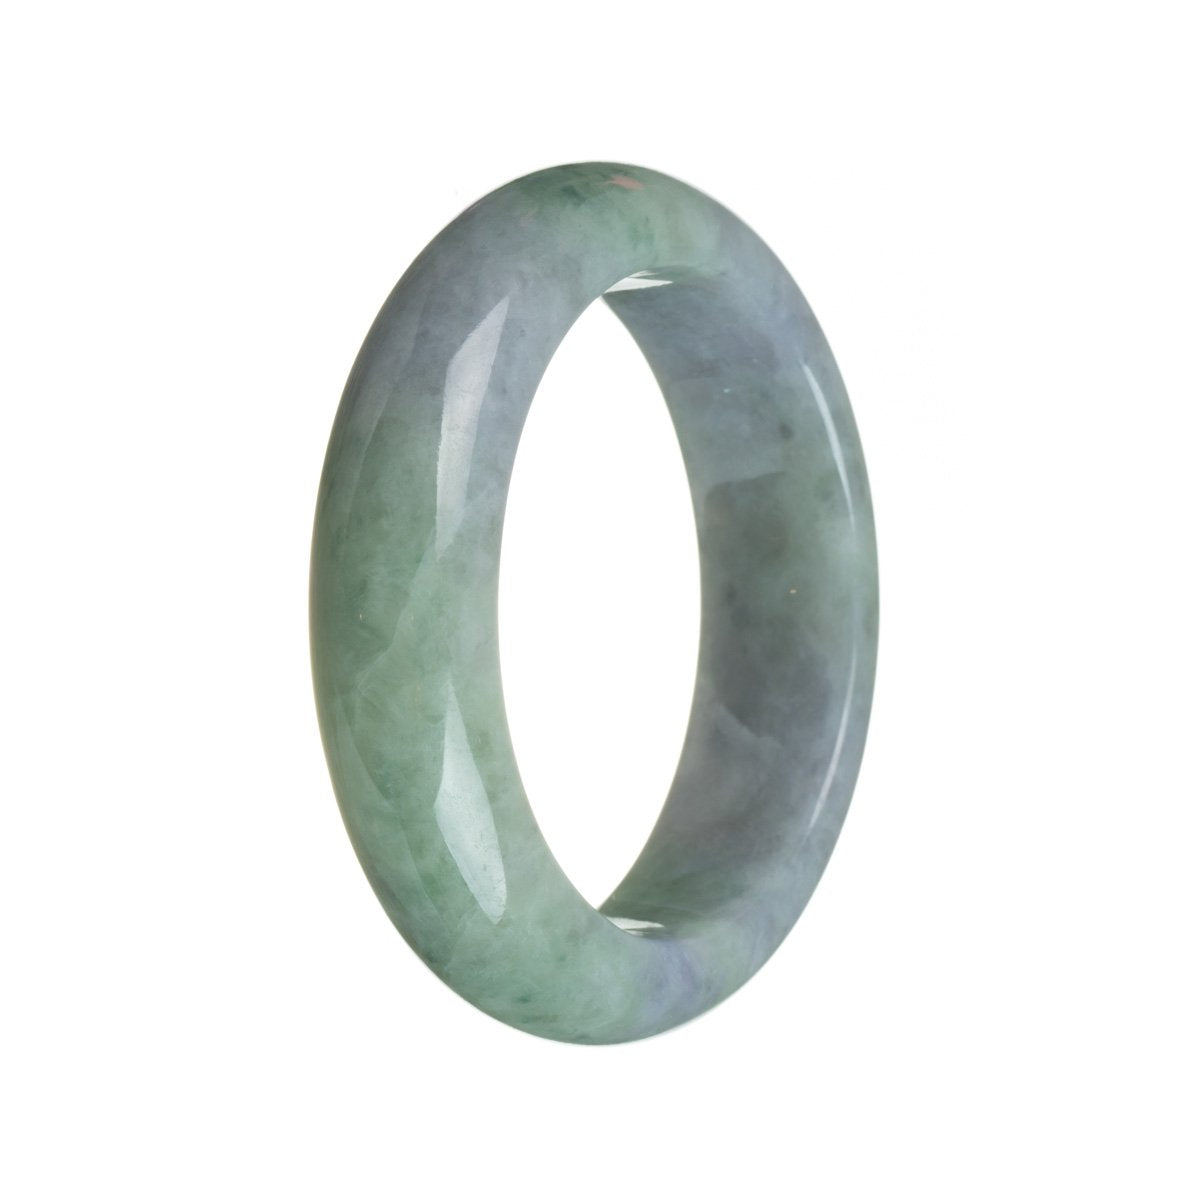 A close-up photo of an oval-shaped lavender and green Burmese jade bangle, with a half-moon design. The bangle has a polished and smooth surface, showcasing the natural beauty of the jade.